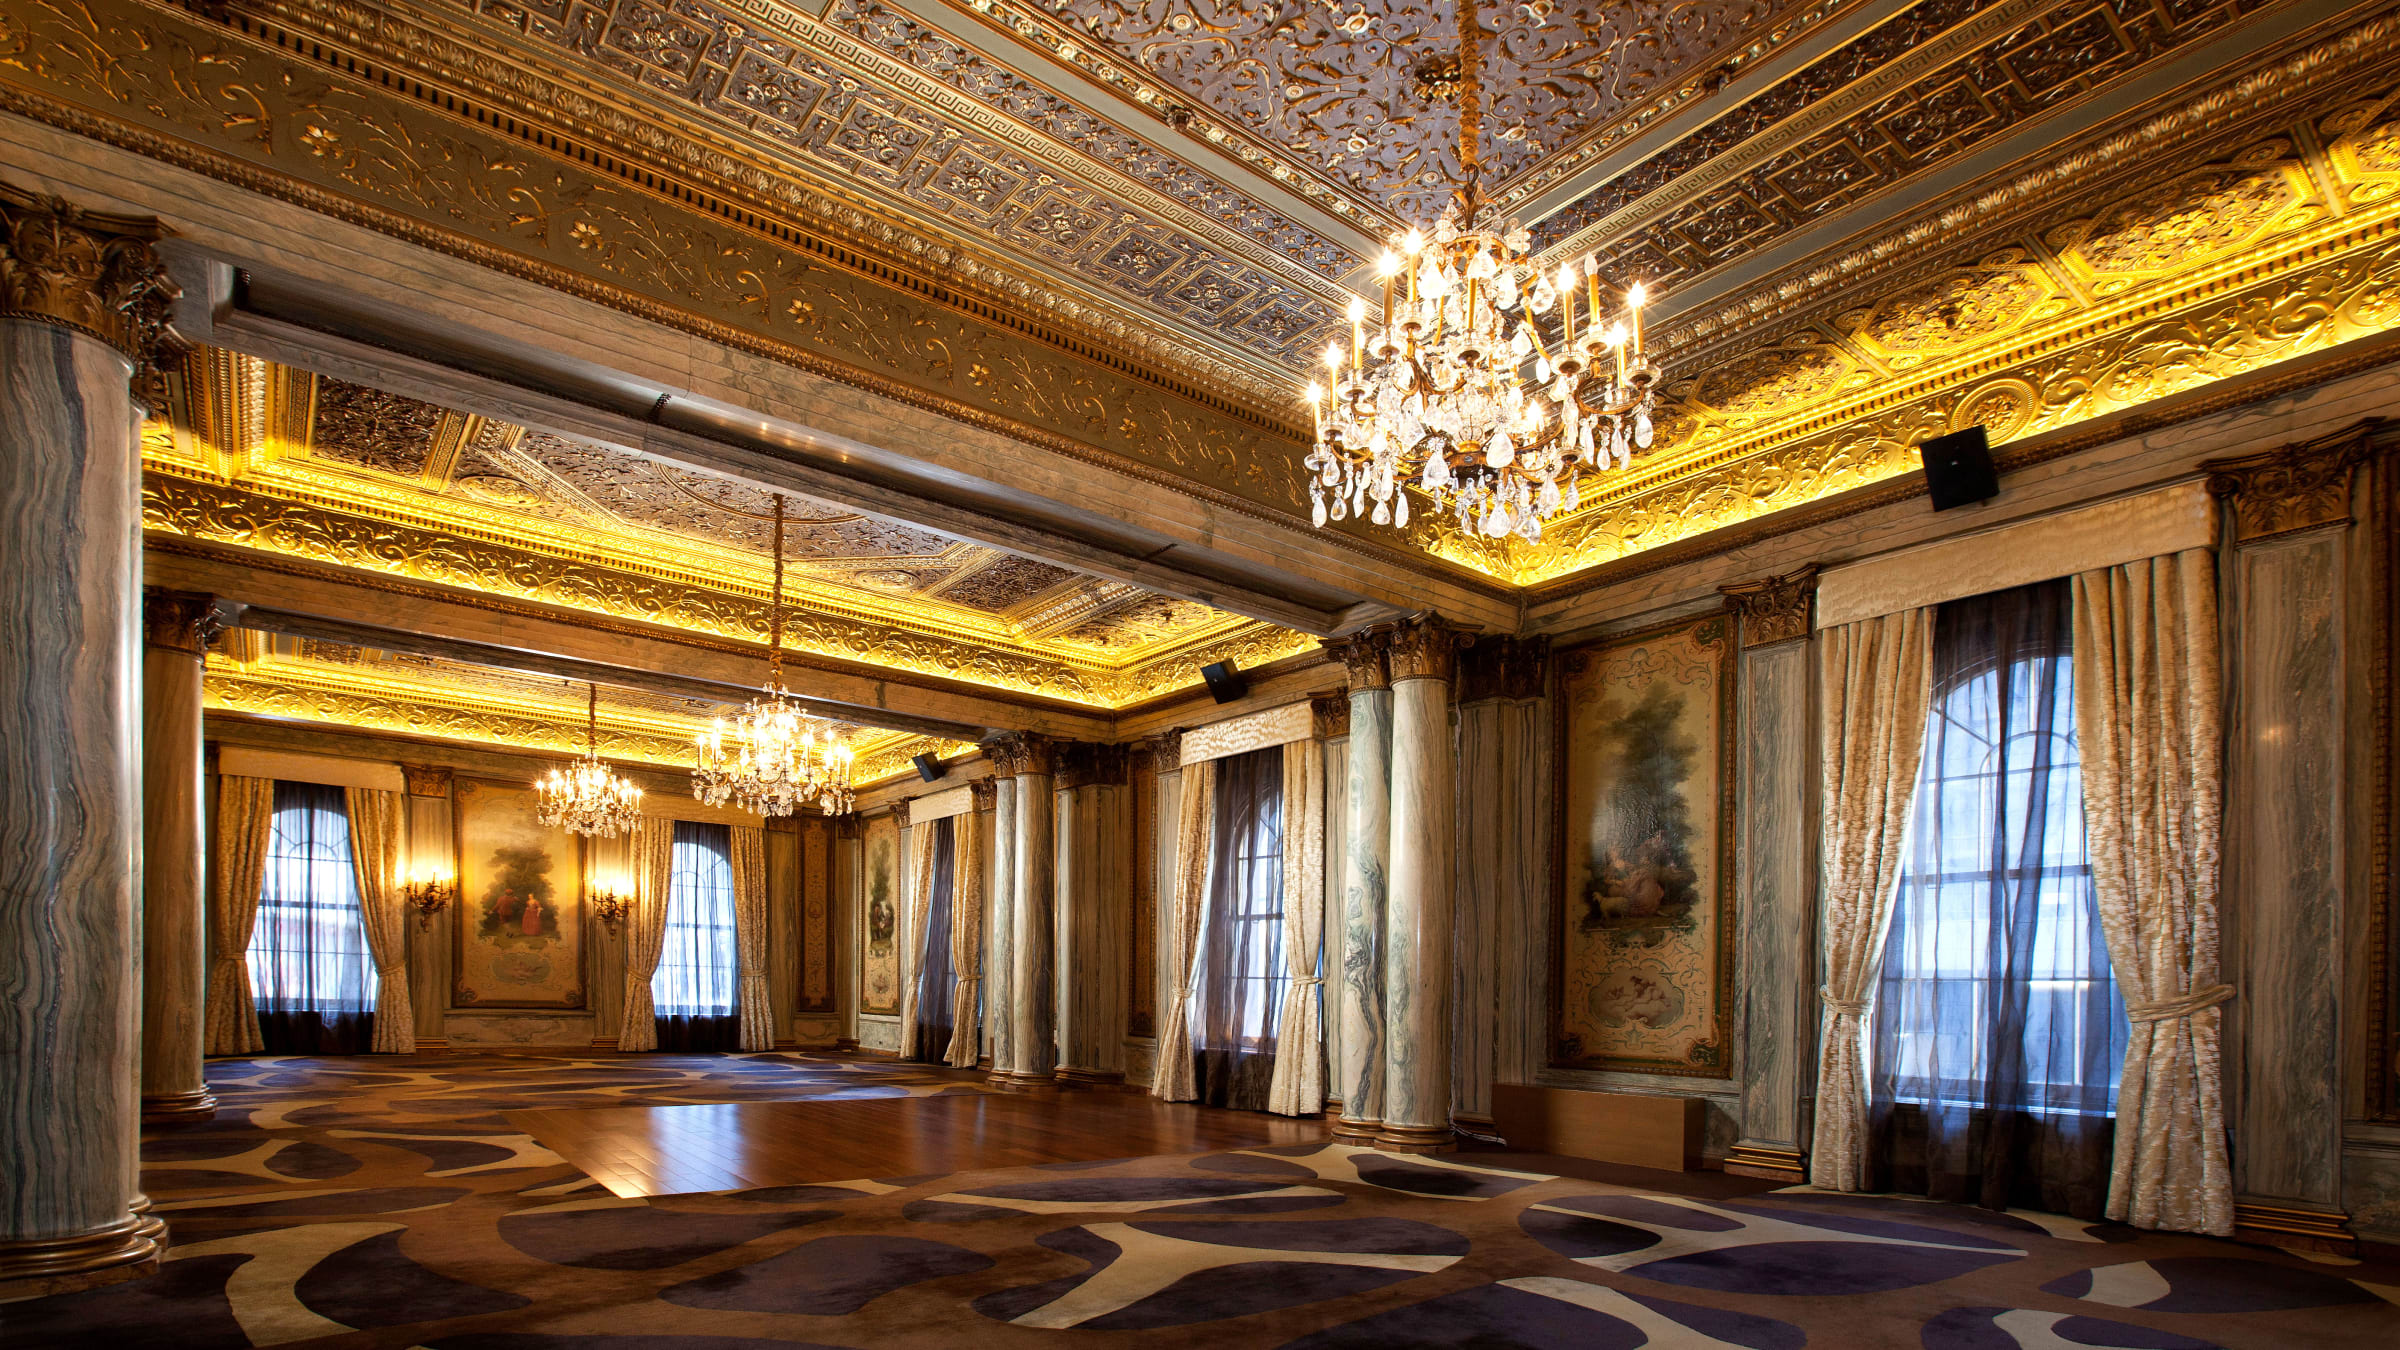 Villard House, the NYC Mansion of Doomed Railroad Tycoon, Now Open for Tours by Lotte New York Palace Hotel image